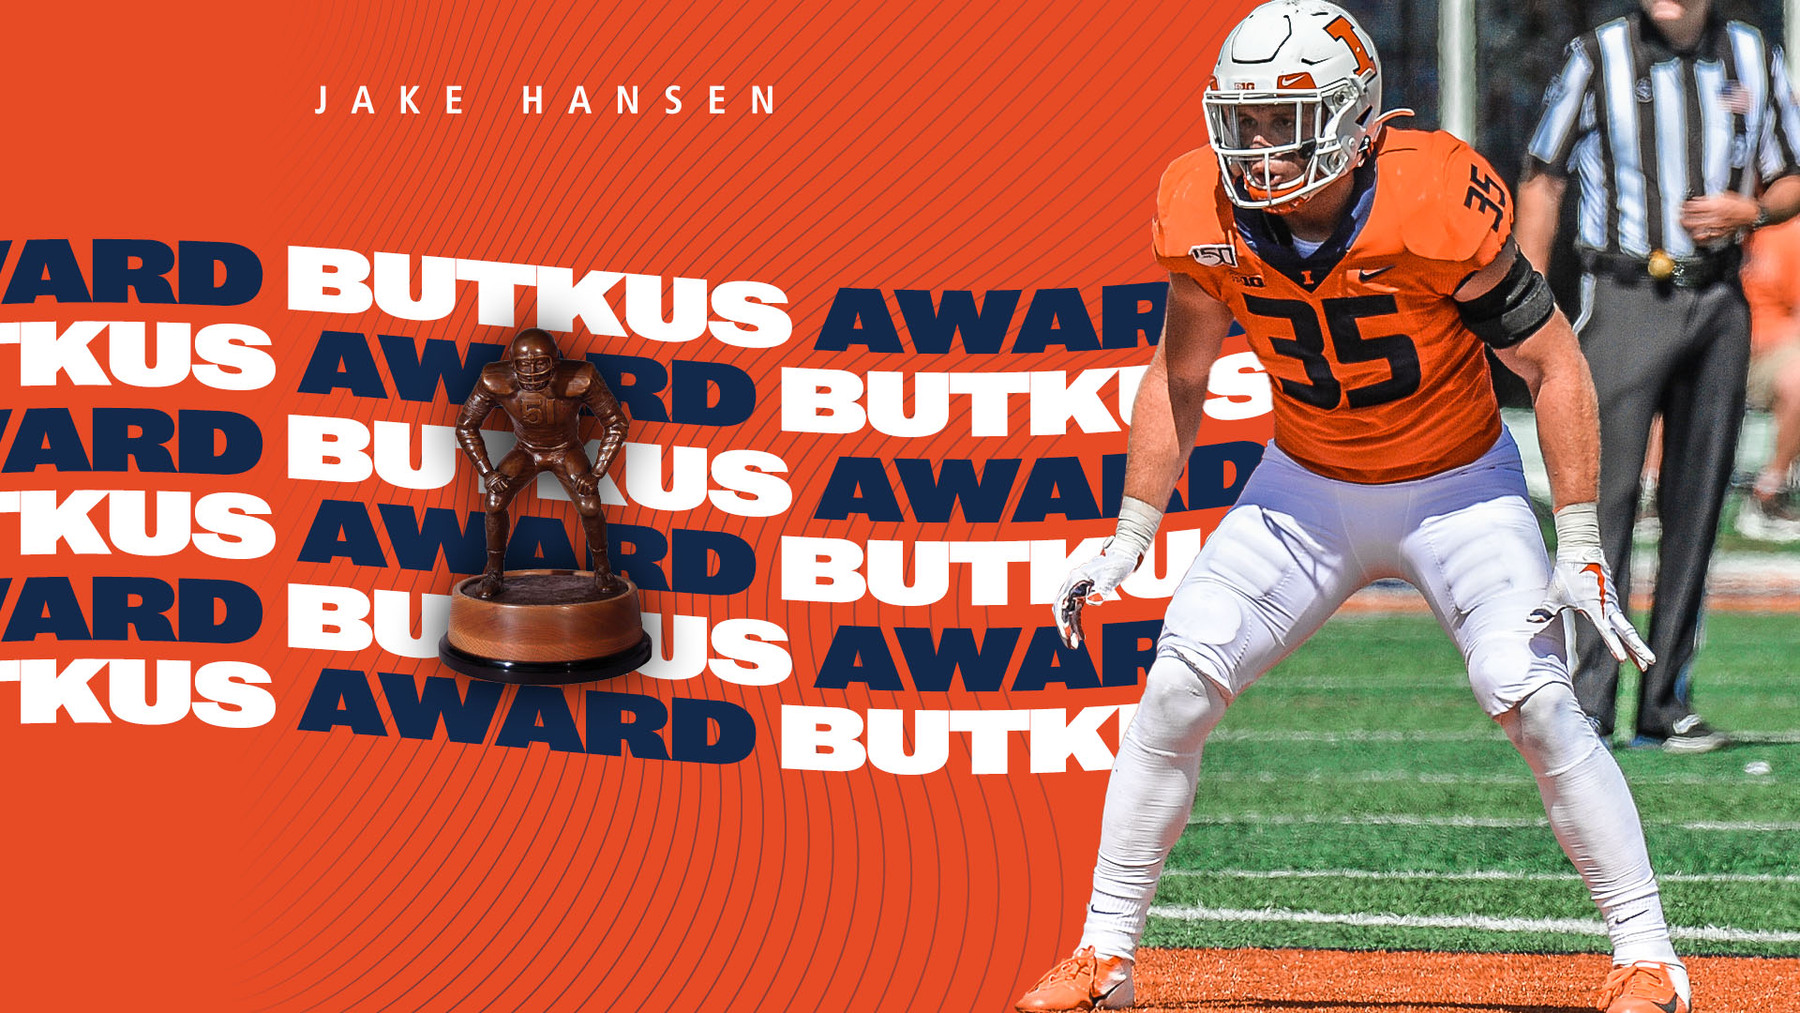 Hanson awaiting a play. Image over Butkus Award graphic